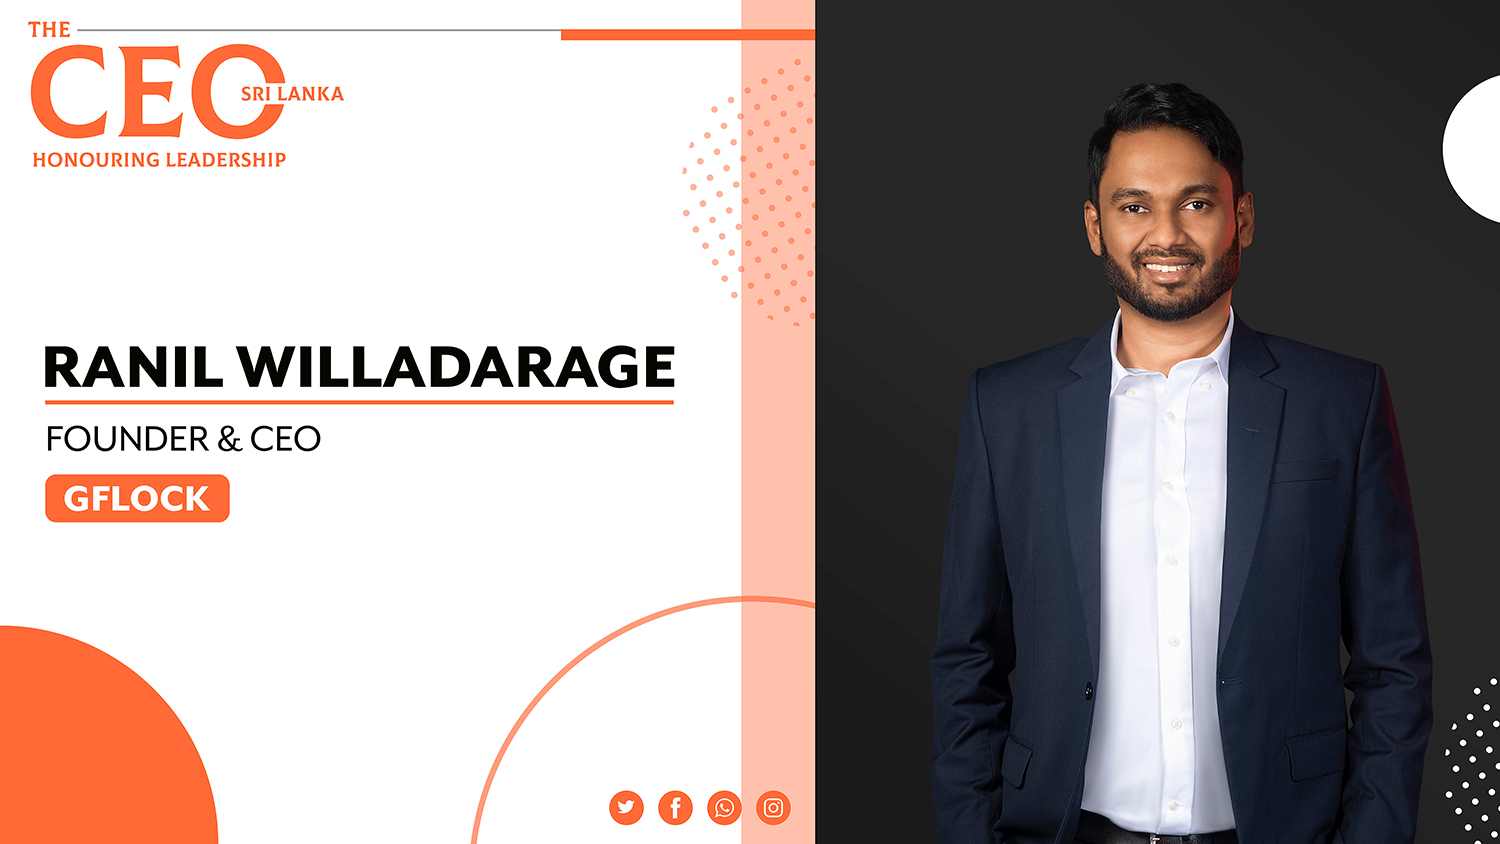 TAKING THE FAST FASHION INDUSTRY BY STORM! – FOUNDER AND CEO OF GFLOCK, RANIL WILLADARAGE